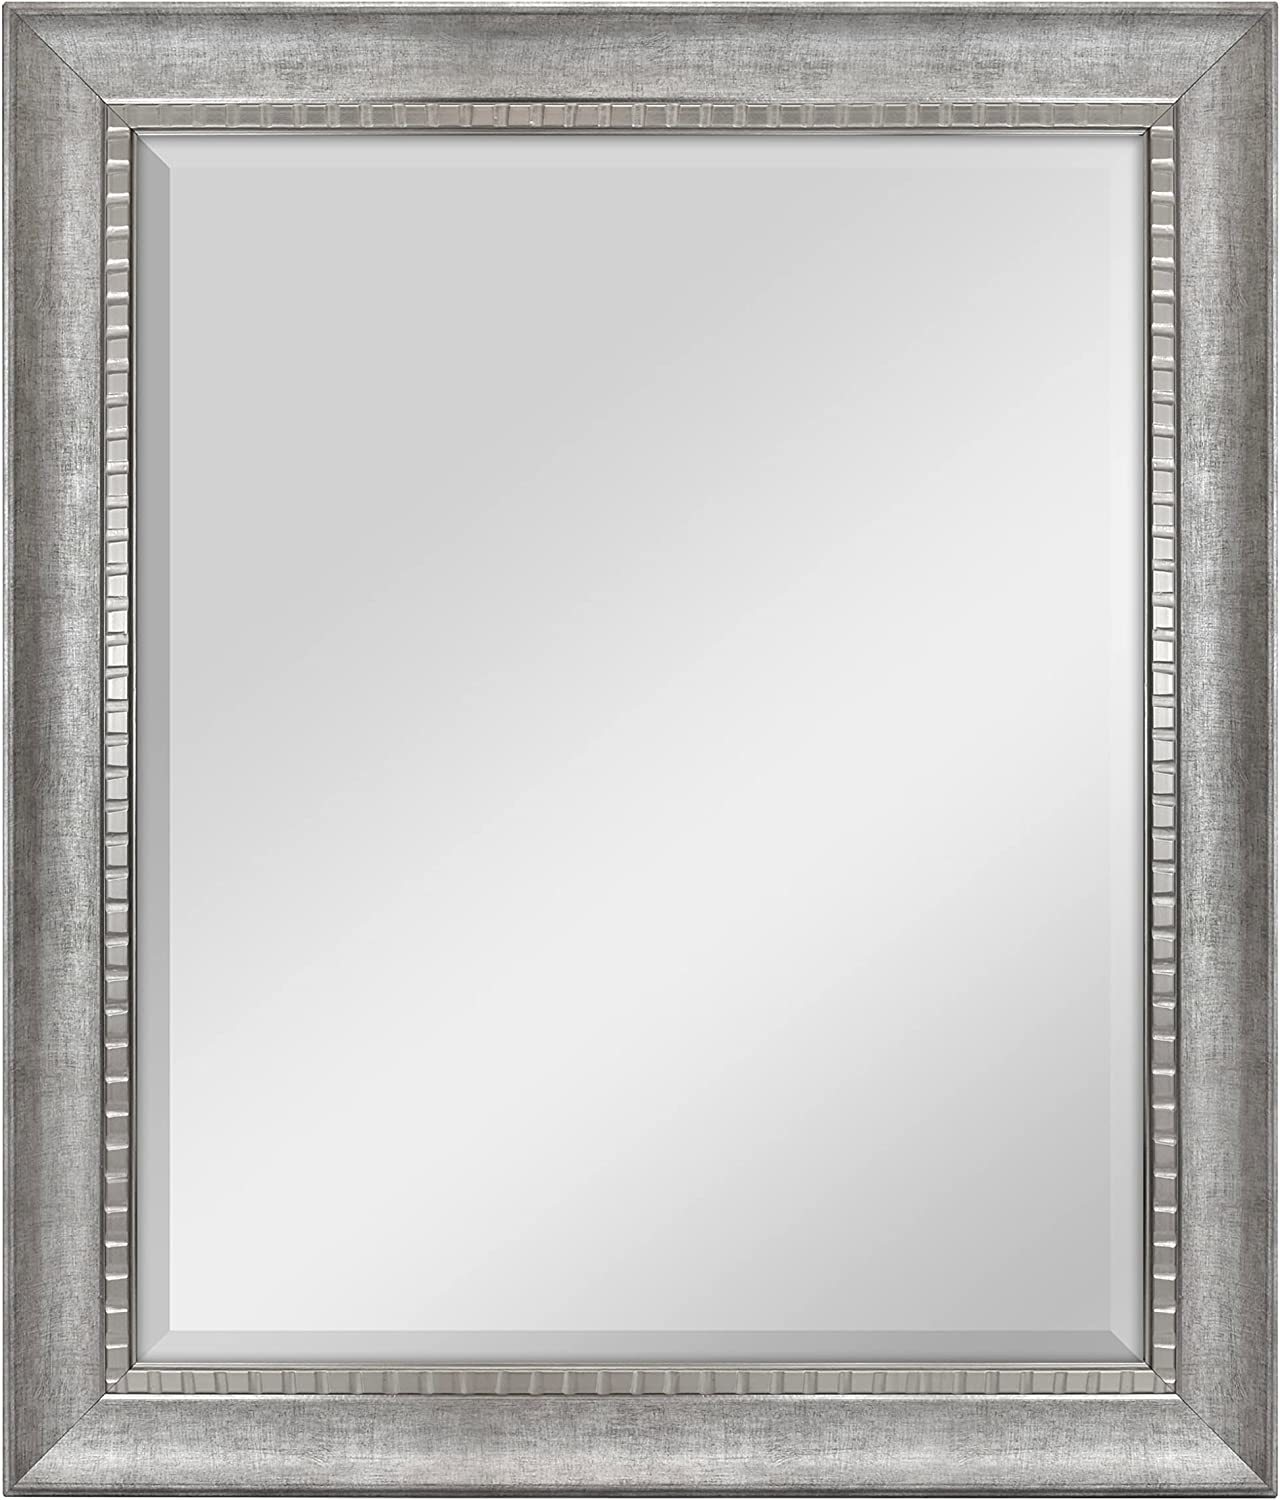 Mcs 22X28 Inch Slope Mirror, 27.5X33.5 Inch Overall Size, Silver (20564) - $79.99